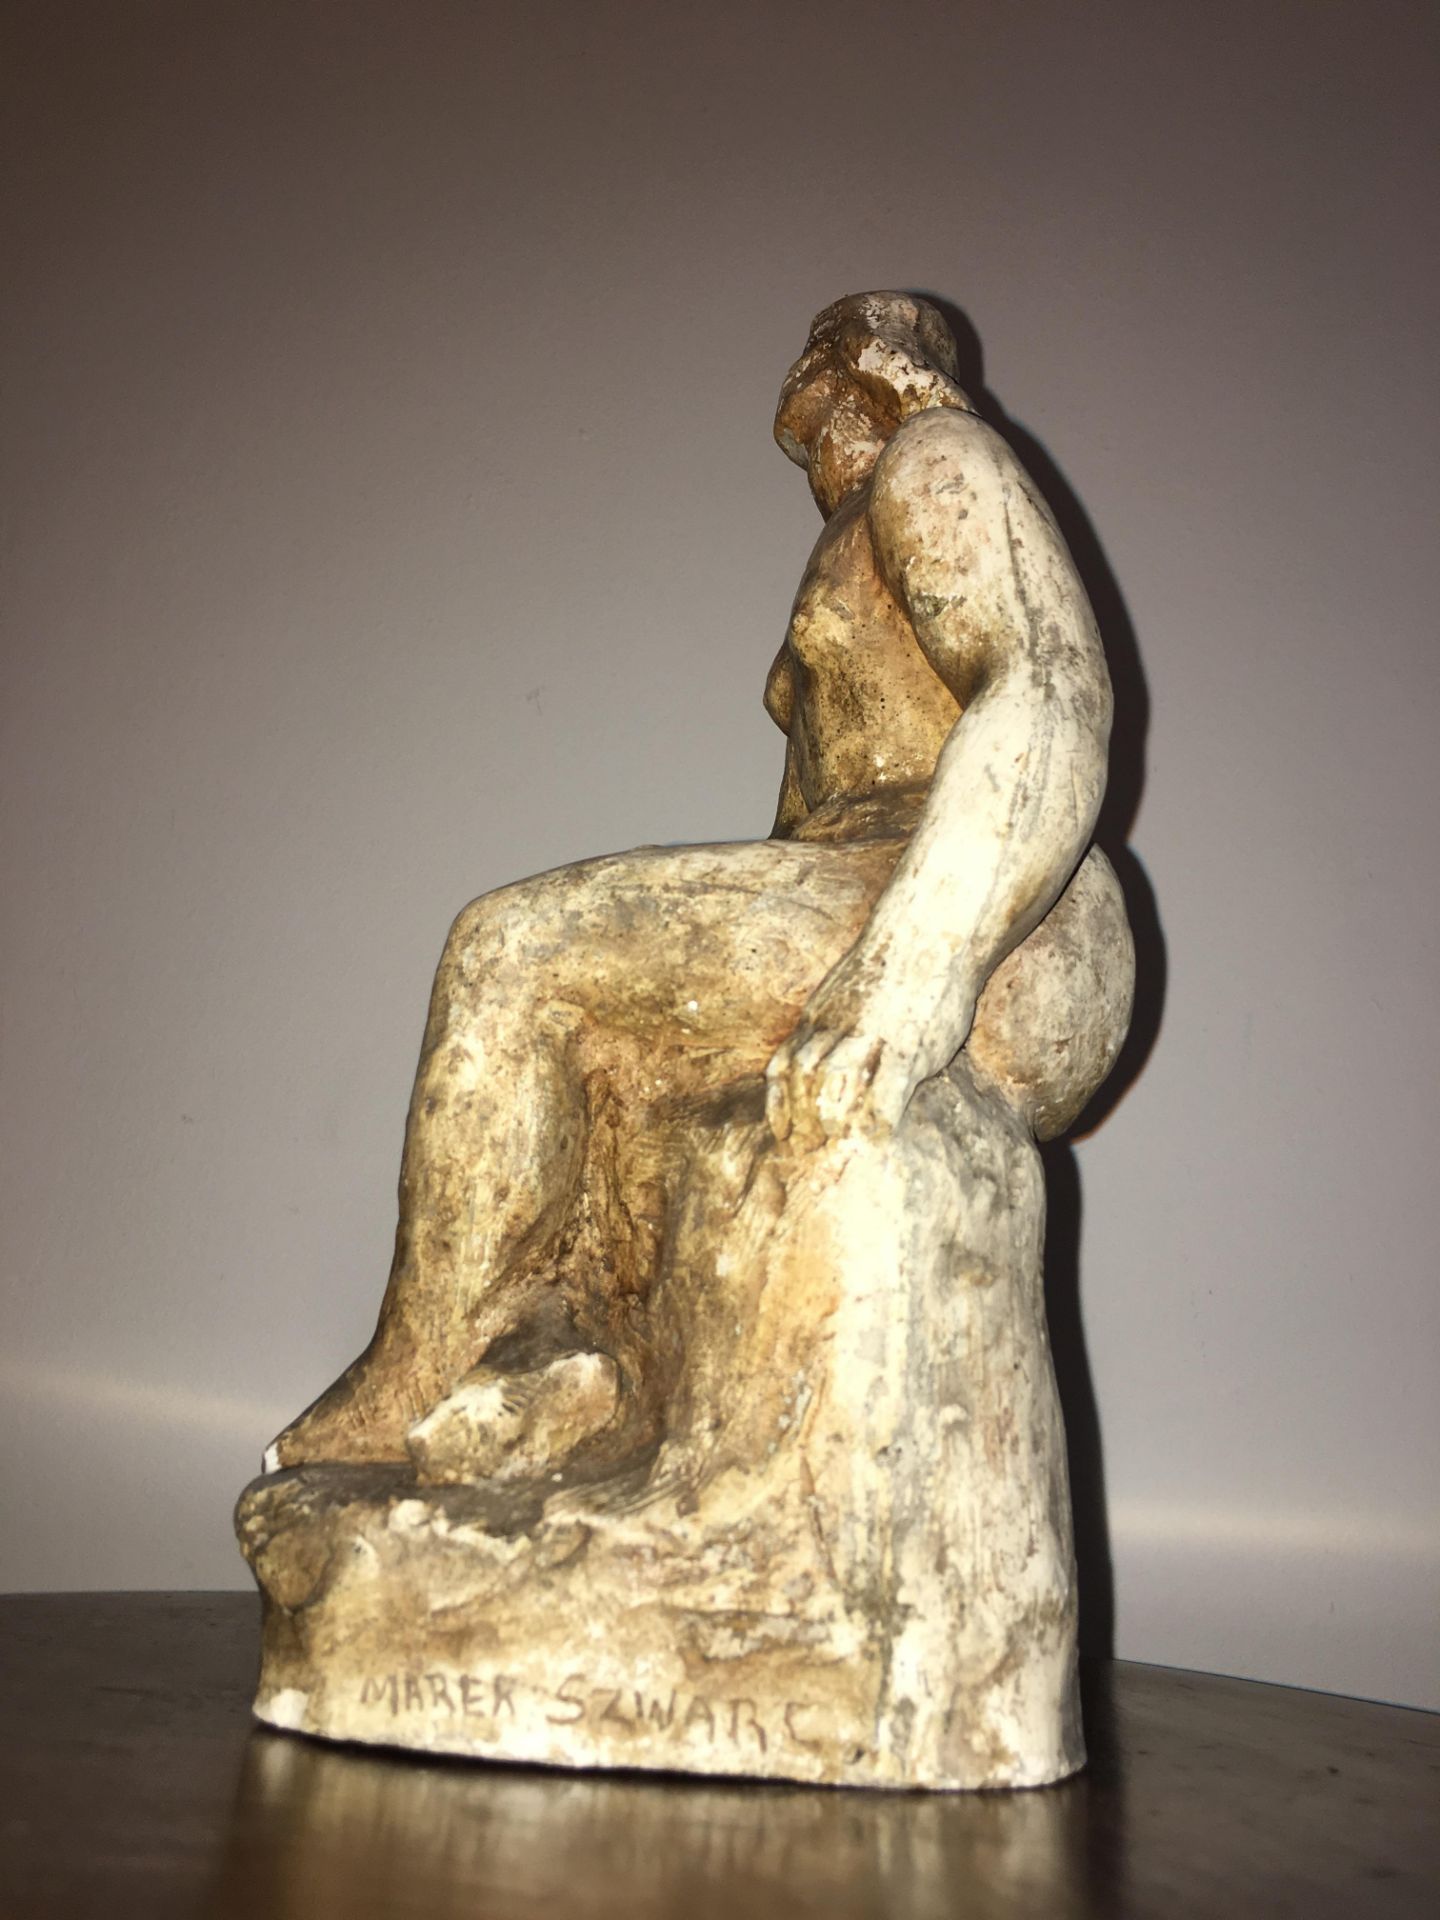 Seated female plaster sculpture, 26cms, signed by Marek Szwarc, 1892-1958 - Image 2 of 6